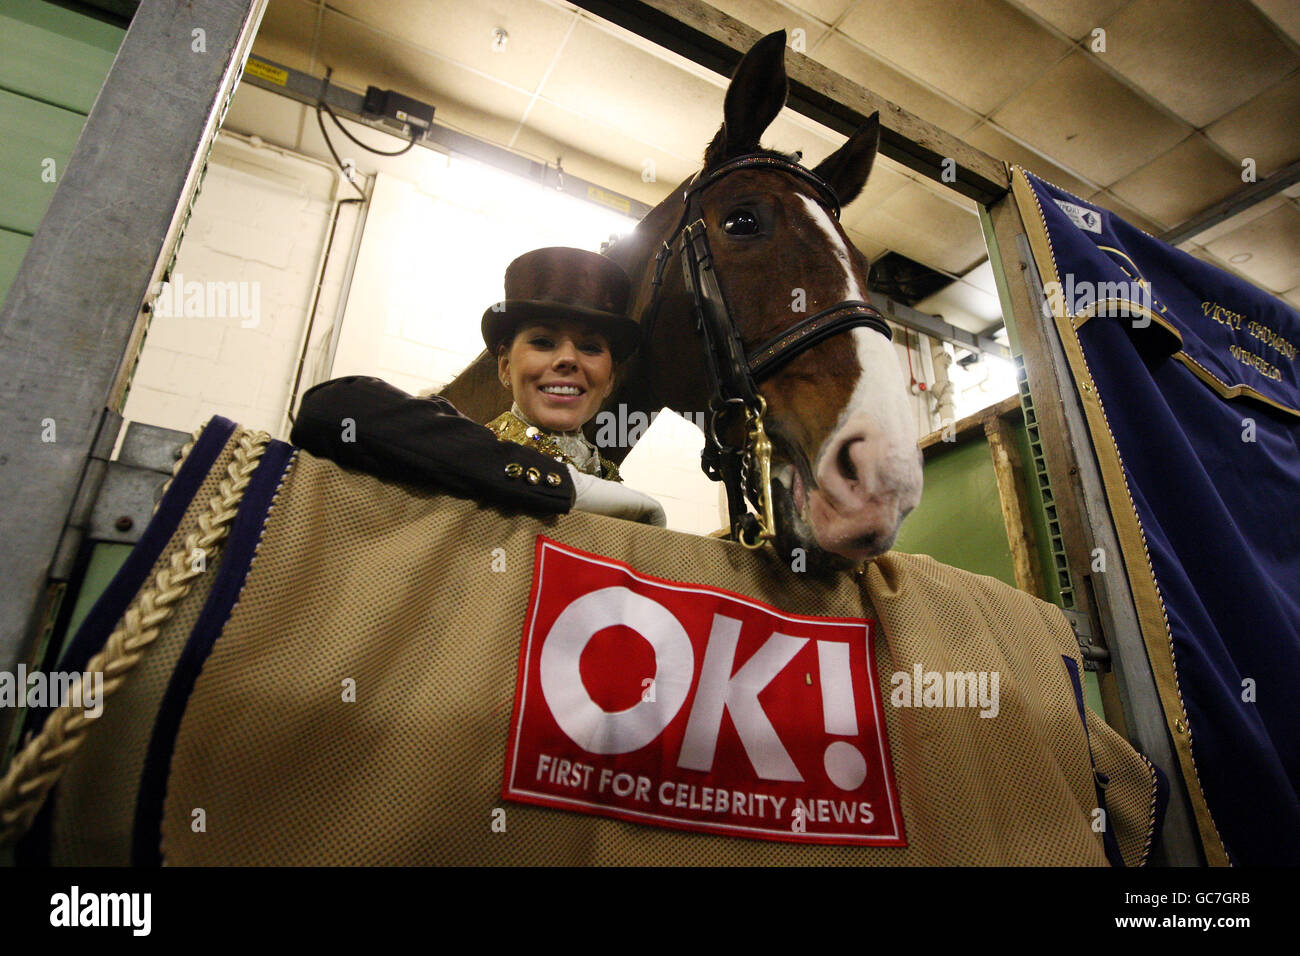 Equestrian - London International Horse Show - Day Two - Olympia Exhibition Centre. Toni Terry, wife of Chelsea and England Captain John, during the London International Horse Show at the Olympia Exhibition Centre, London. Stock Photo